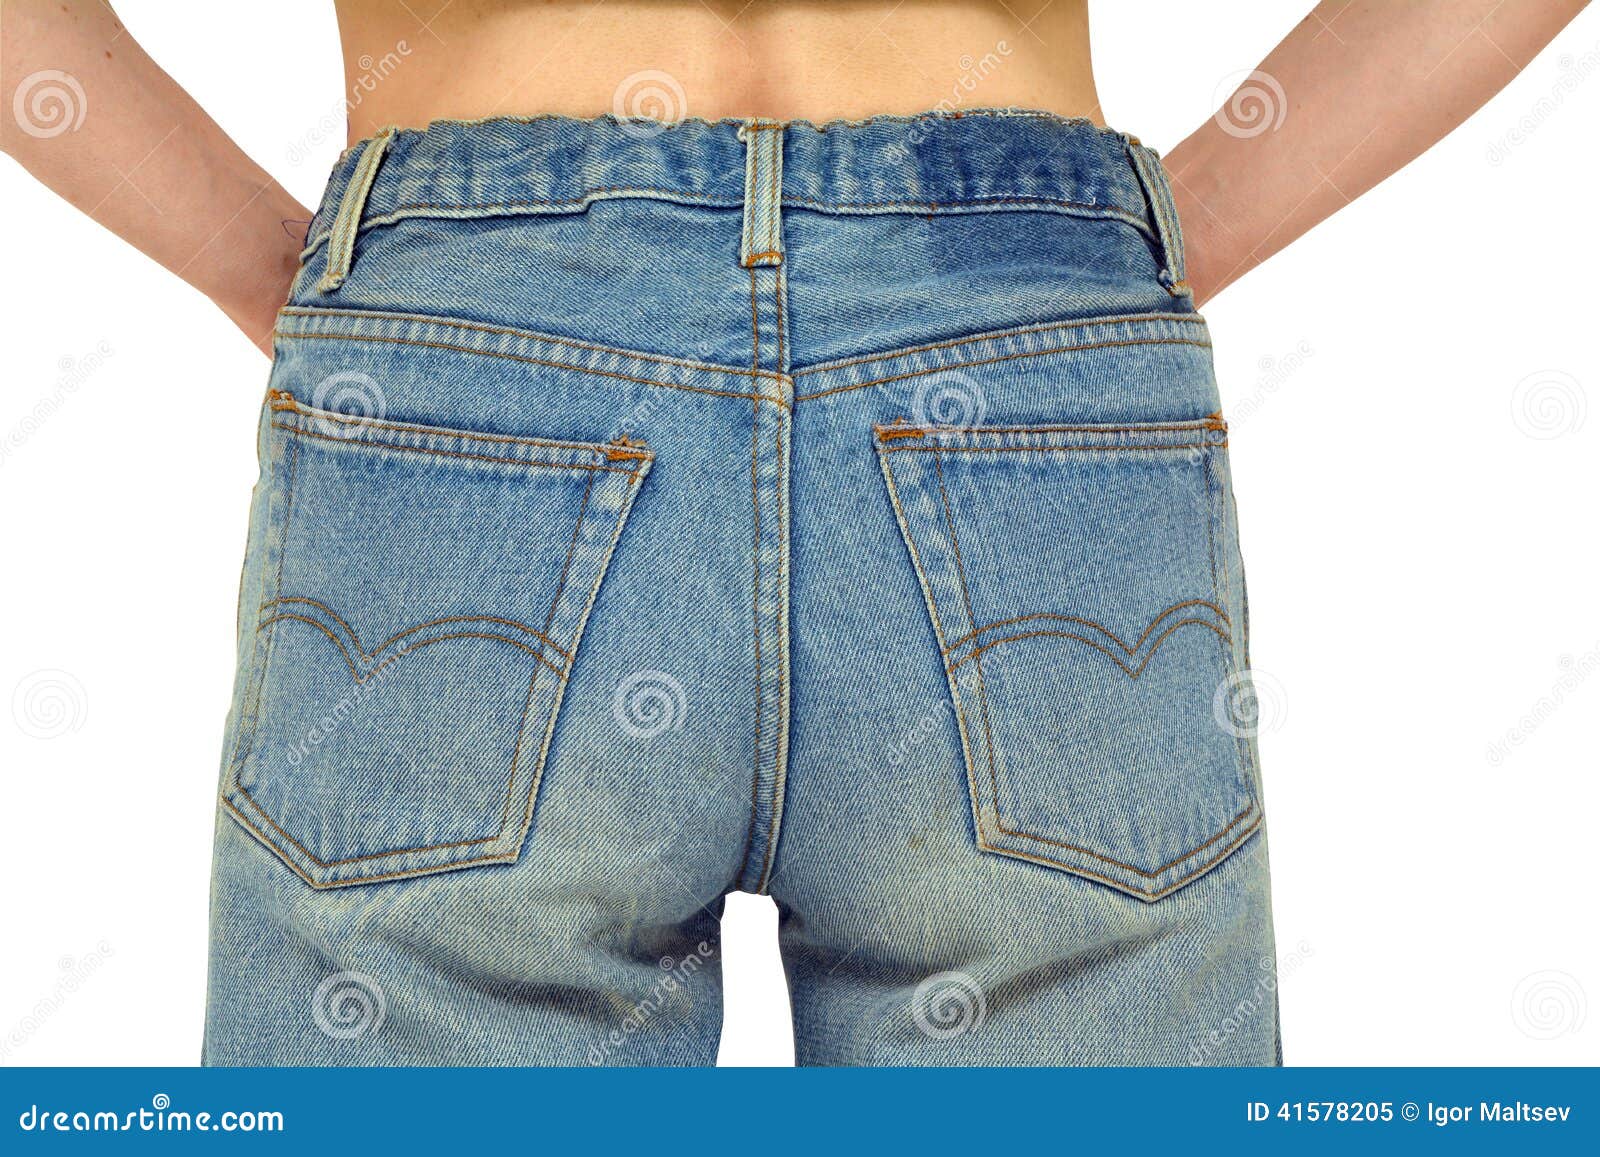 Jeans rear view arms stock image. Image of rear, isolated - 41578205